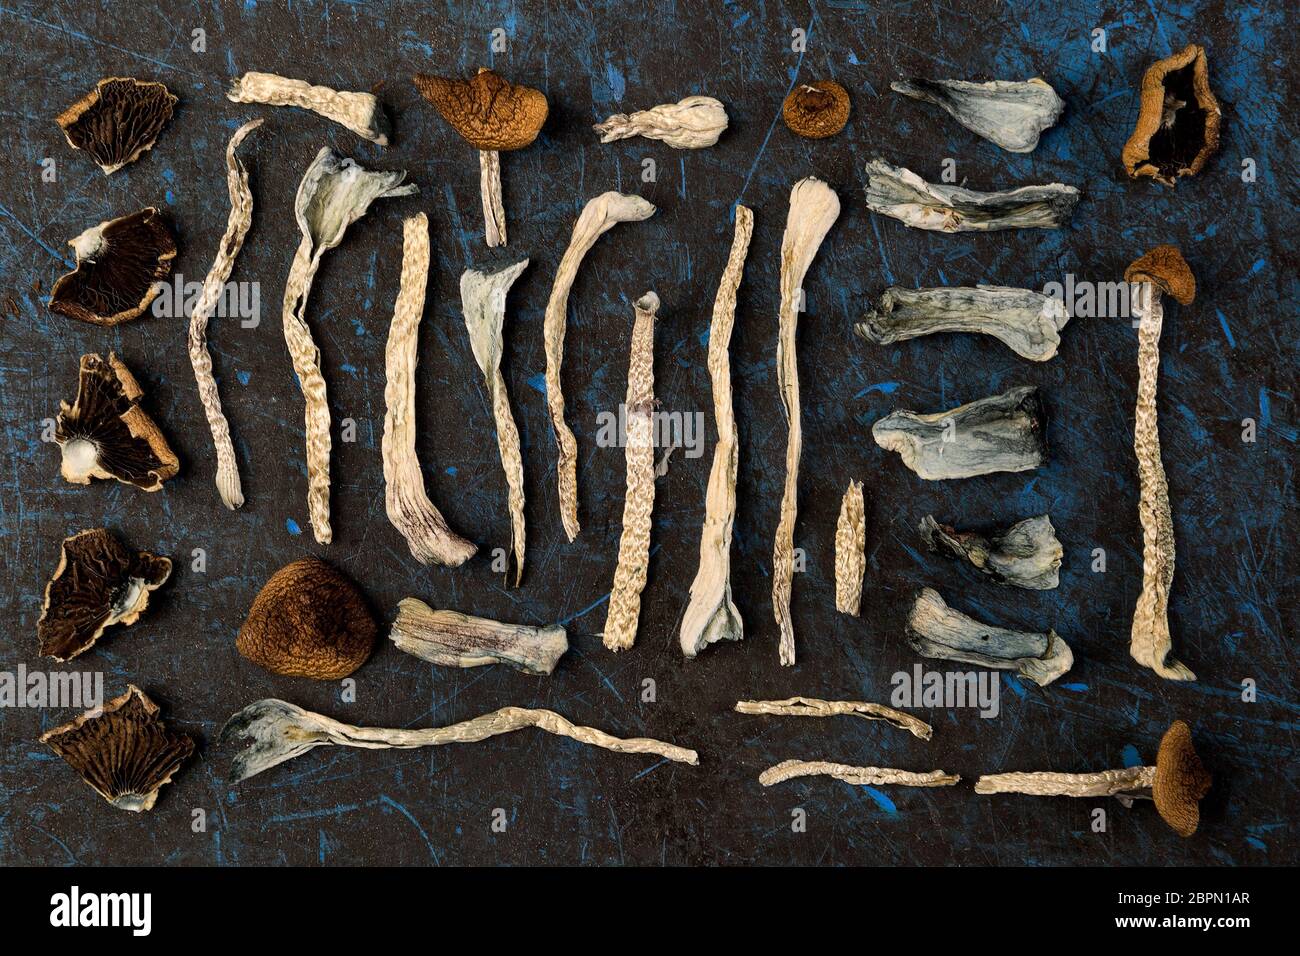 Dried magic mushrooms from above. Knolling flat lay background. Natural remedy. Stock Photo